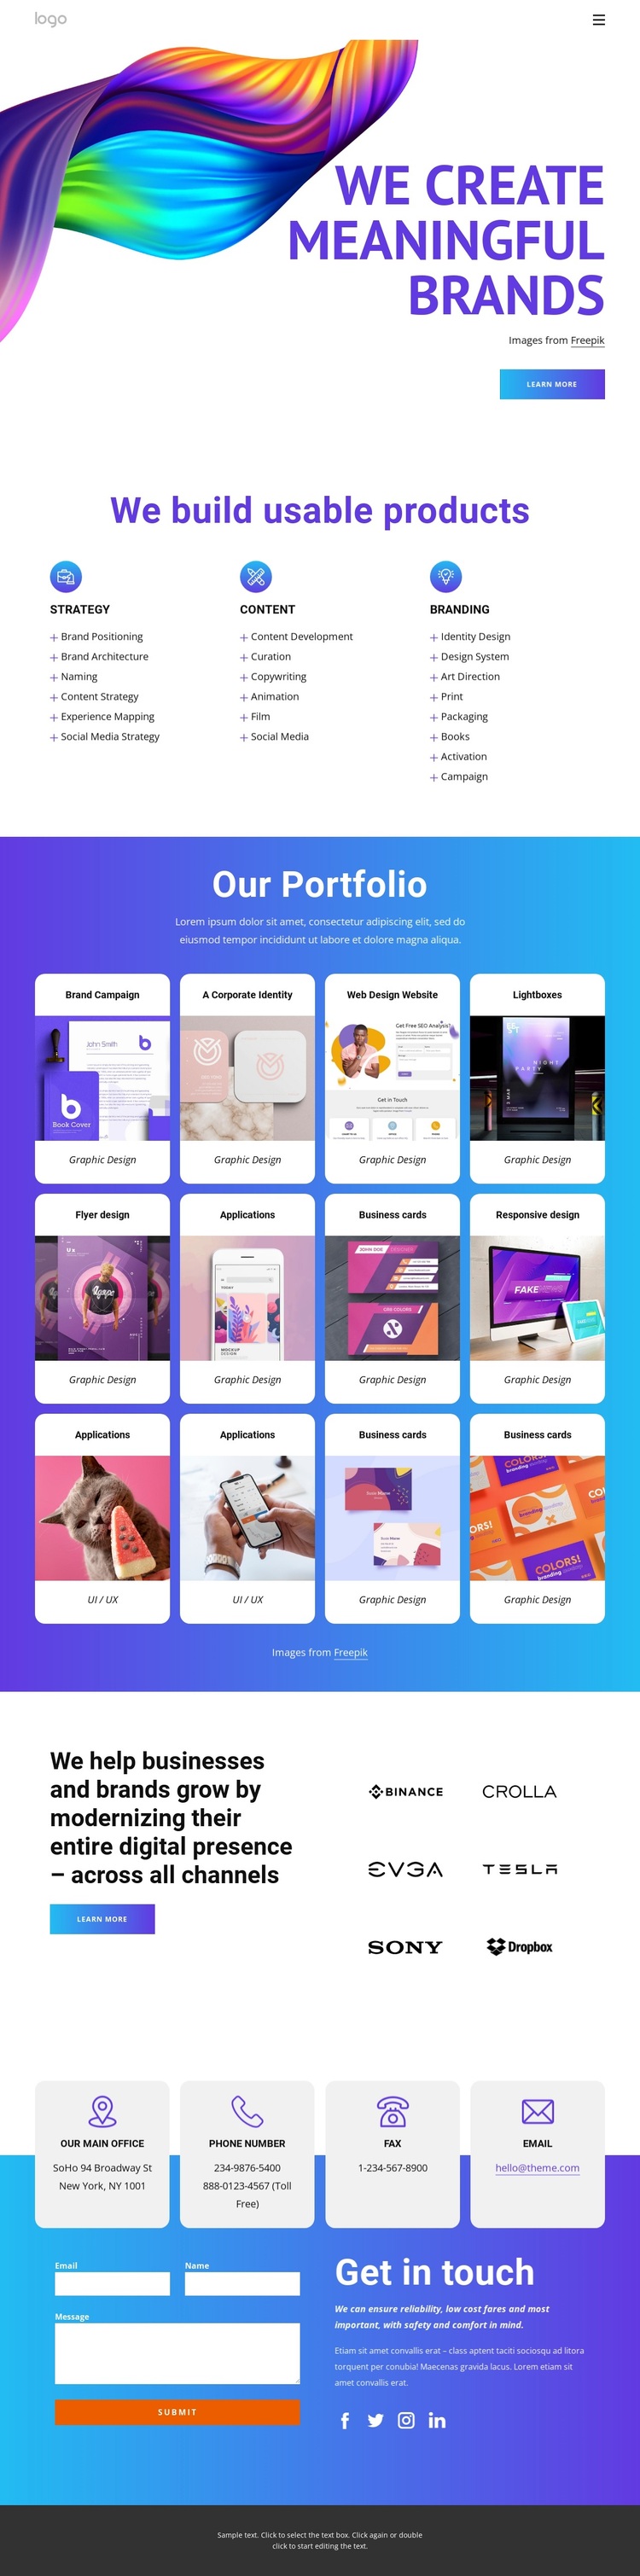 We create meaningful brands Template